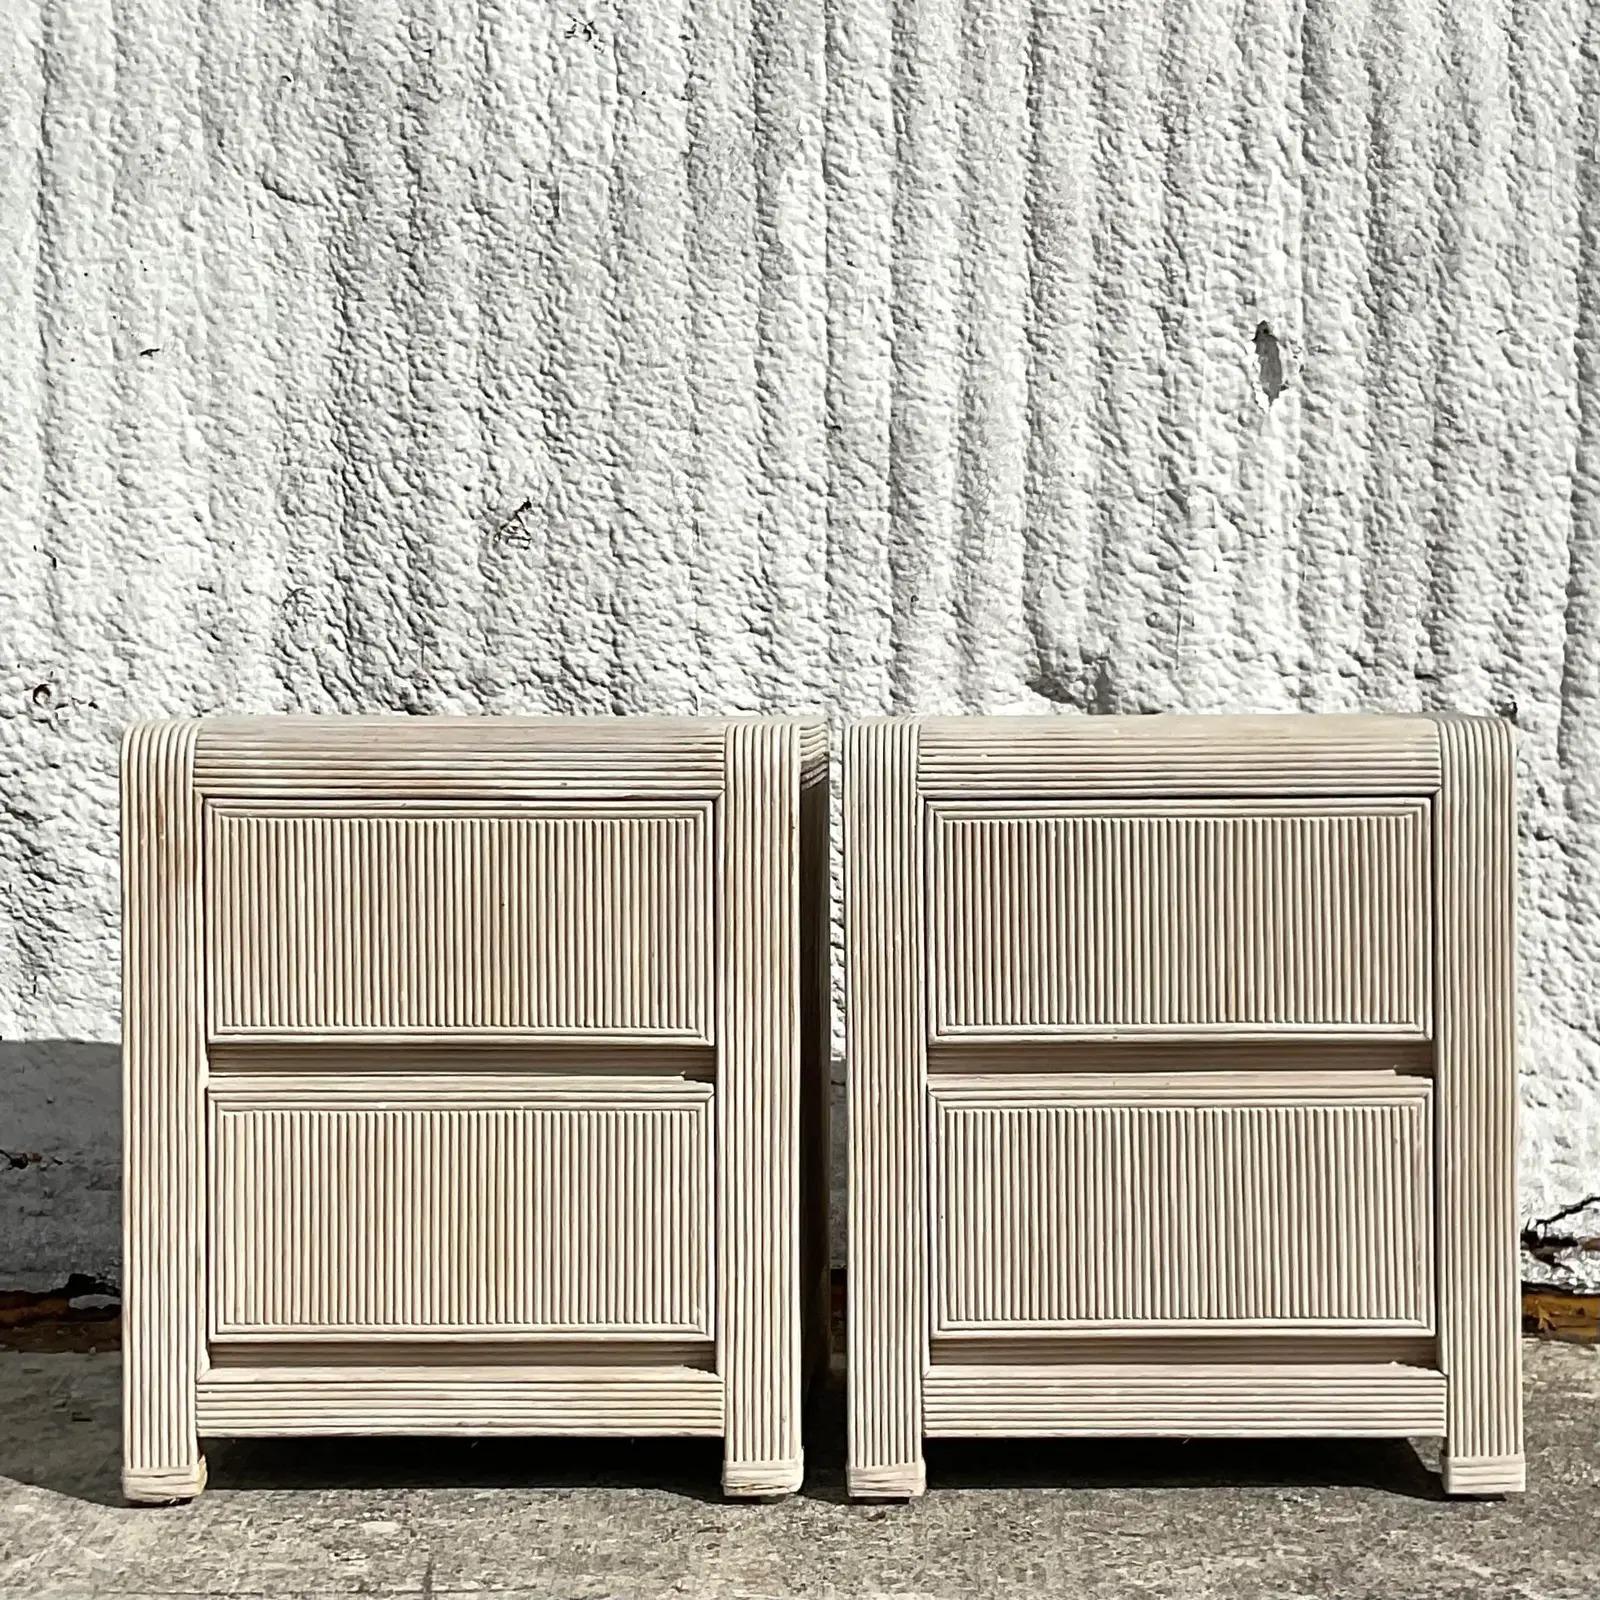 A fantastic pair of vintage Coastal nightstands. Beautiful pencil reed construction with a chic cerused finish. An excellent simple design makes these nightstands perfect for so many different styles. Acquired from a Palm Beach estate.